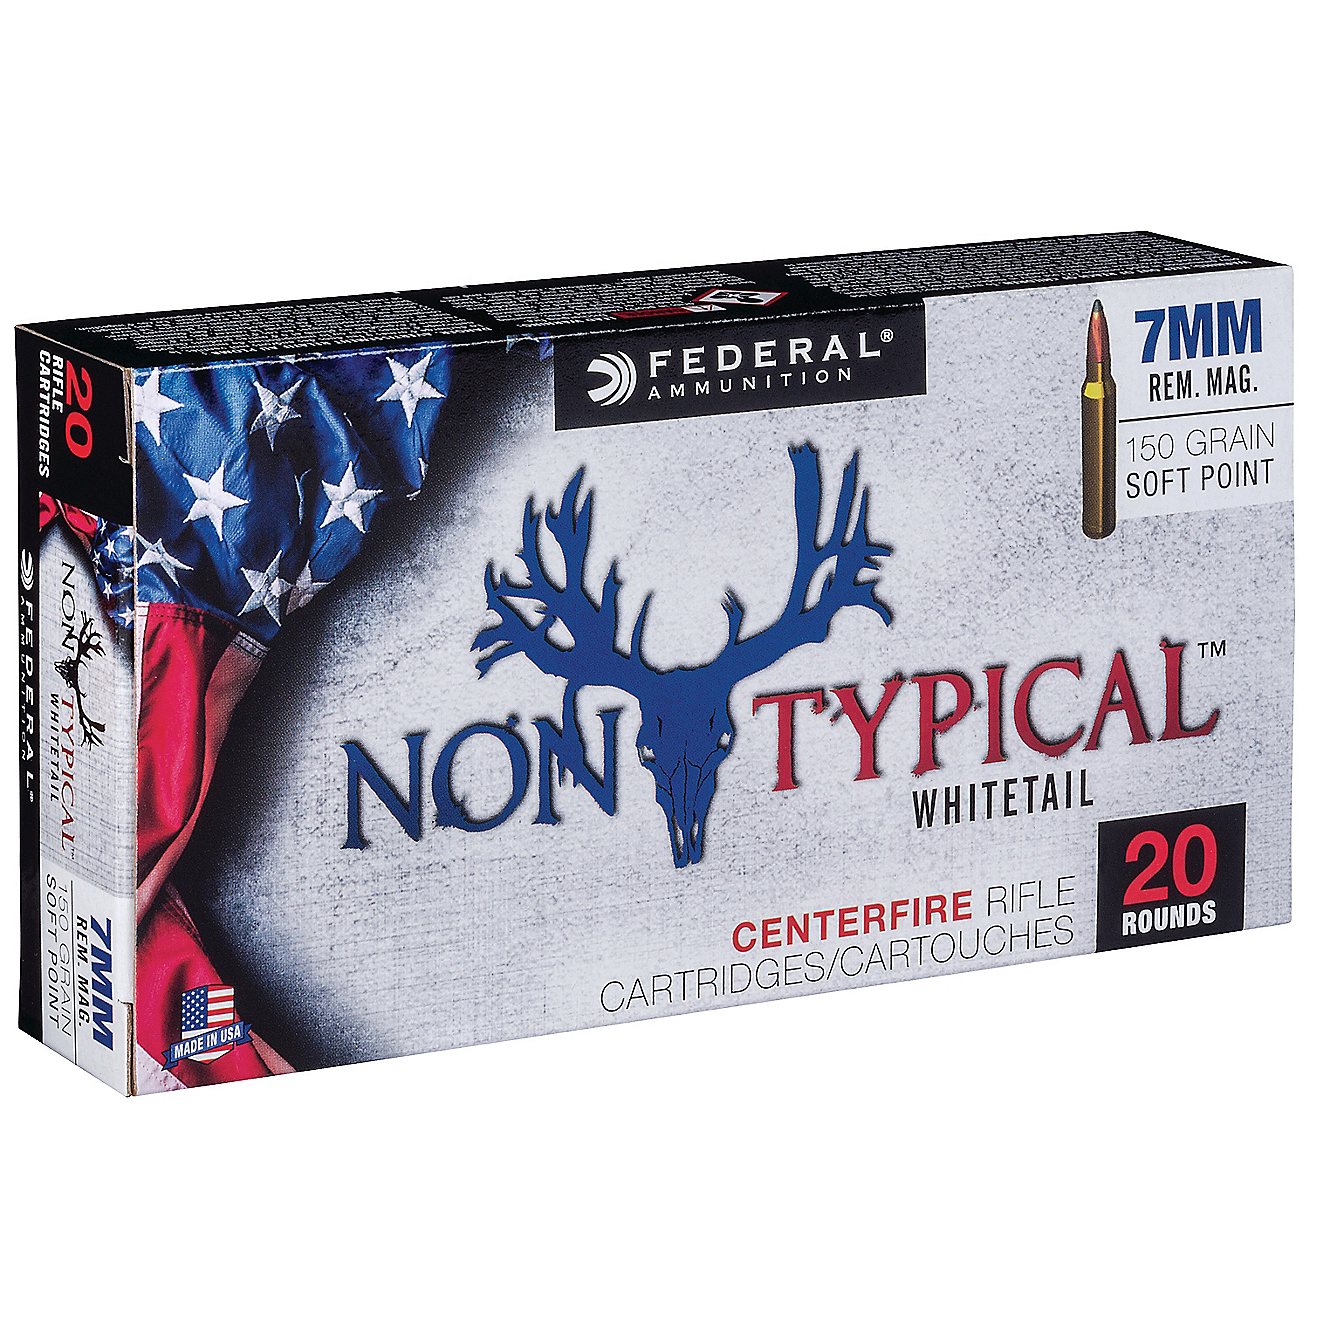 Federal Premium 7mm Rem Mag 150-Grain Nontypical Rifle Ammunition - 20 Rounds                                                    - view number 1